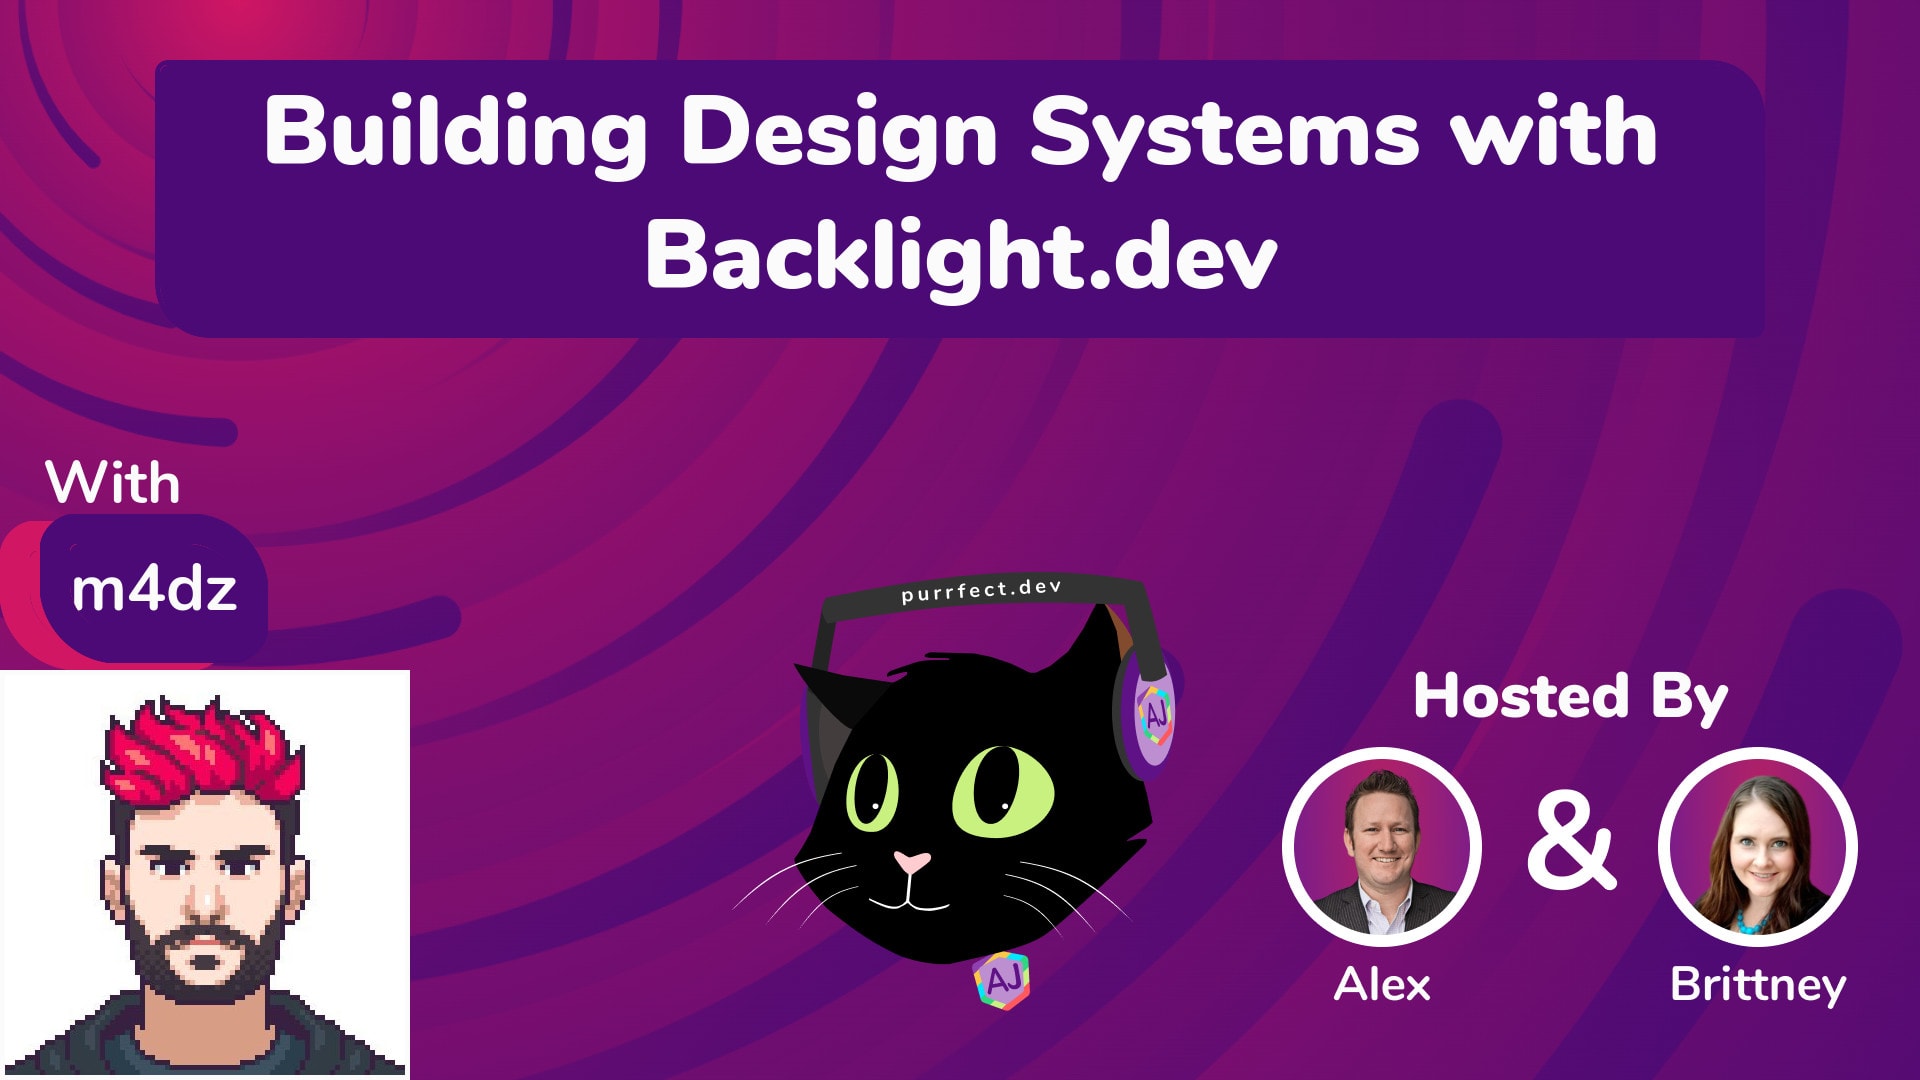 2.7 - Building Design Systems with Backlight.dev